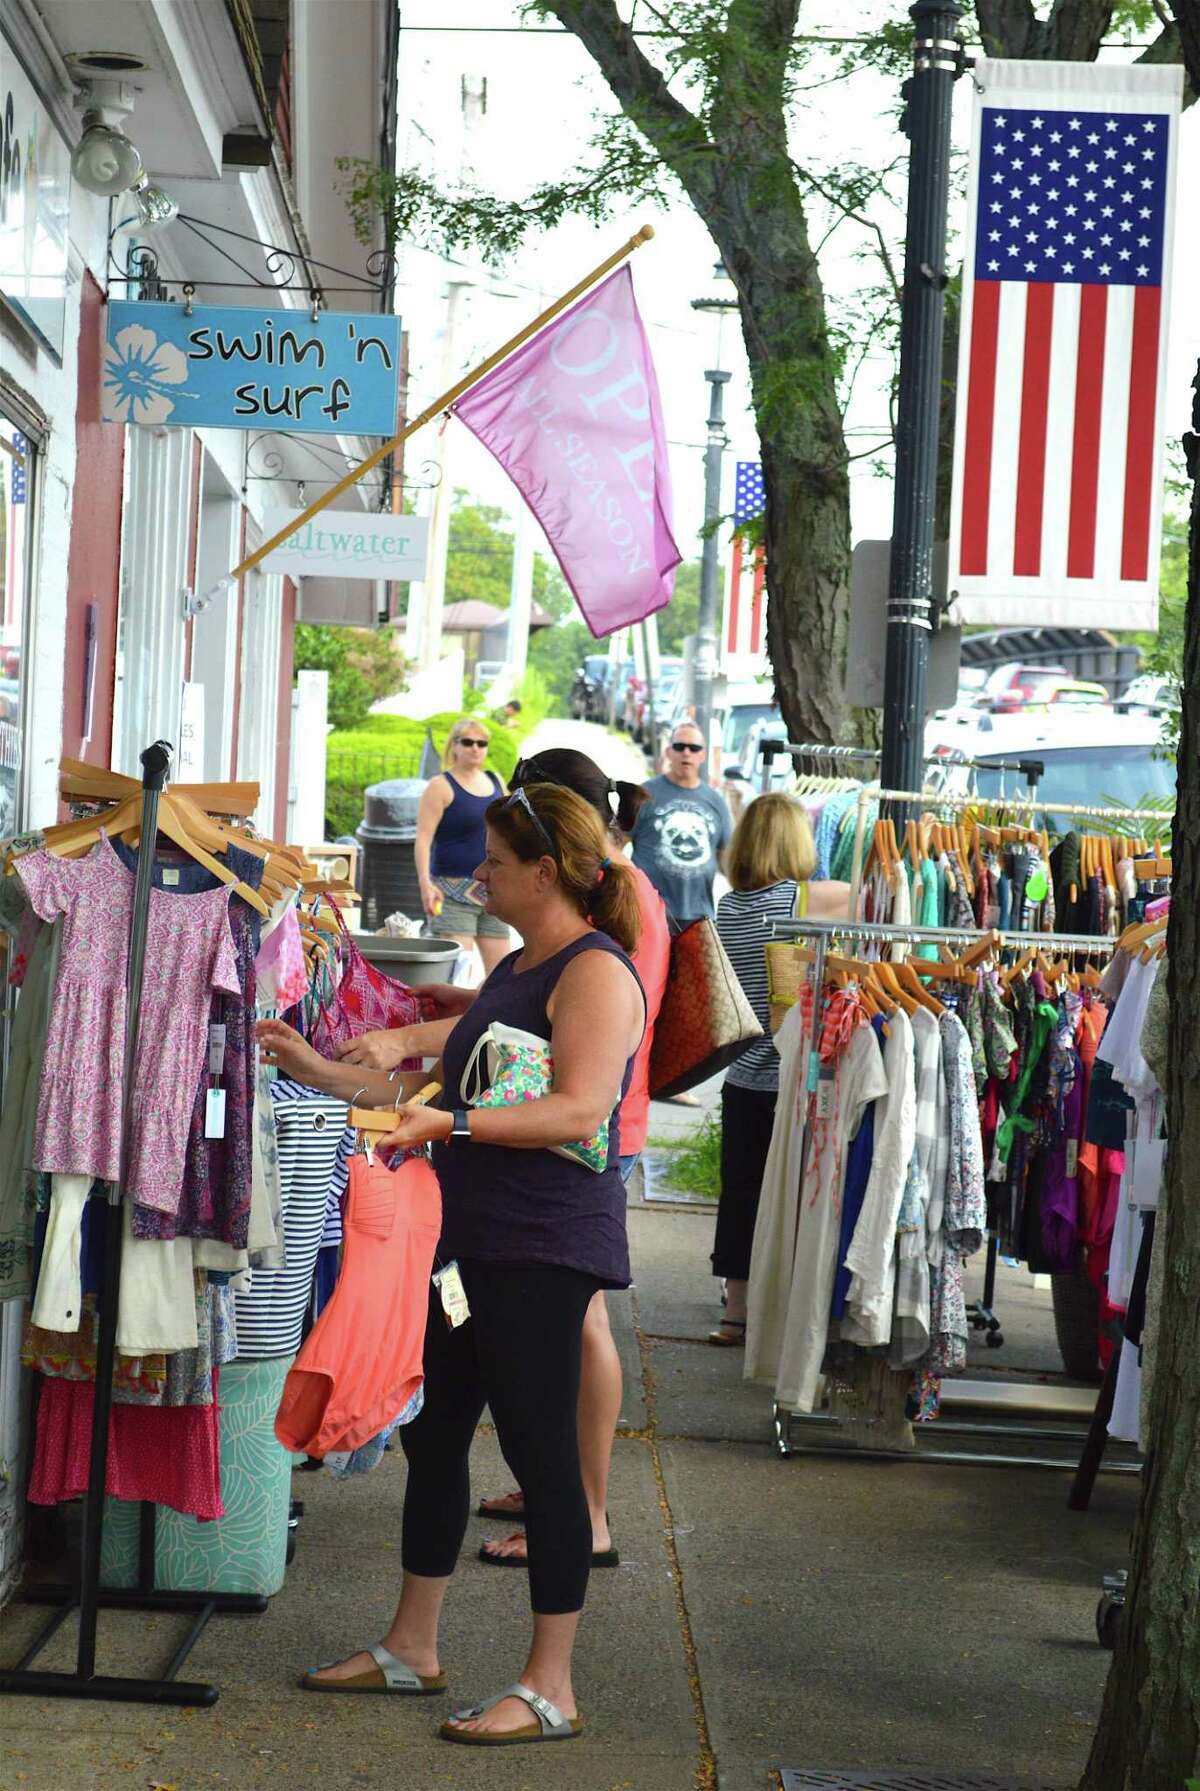 Ali Mitchell of Fairfield takes a look at some clothes on Unquowa Road during a previous Fairfield Sidewalk Sale and Street Fair in a recent year. The Town of Fairfield is having its annual Sidewalk Sale and Street Fair July 16, from 10 a.m. to 4 p.m., rain or shine in the Fairfield Center part of the town.